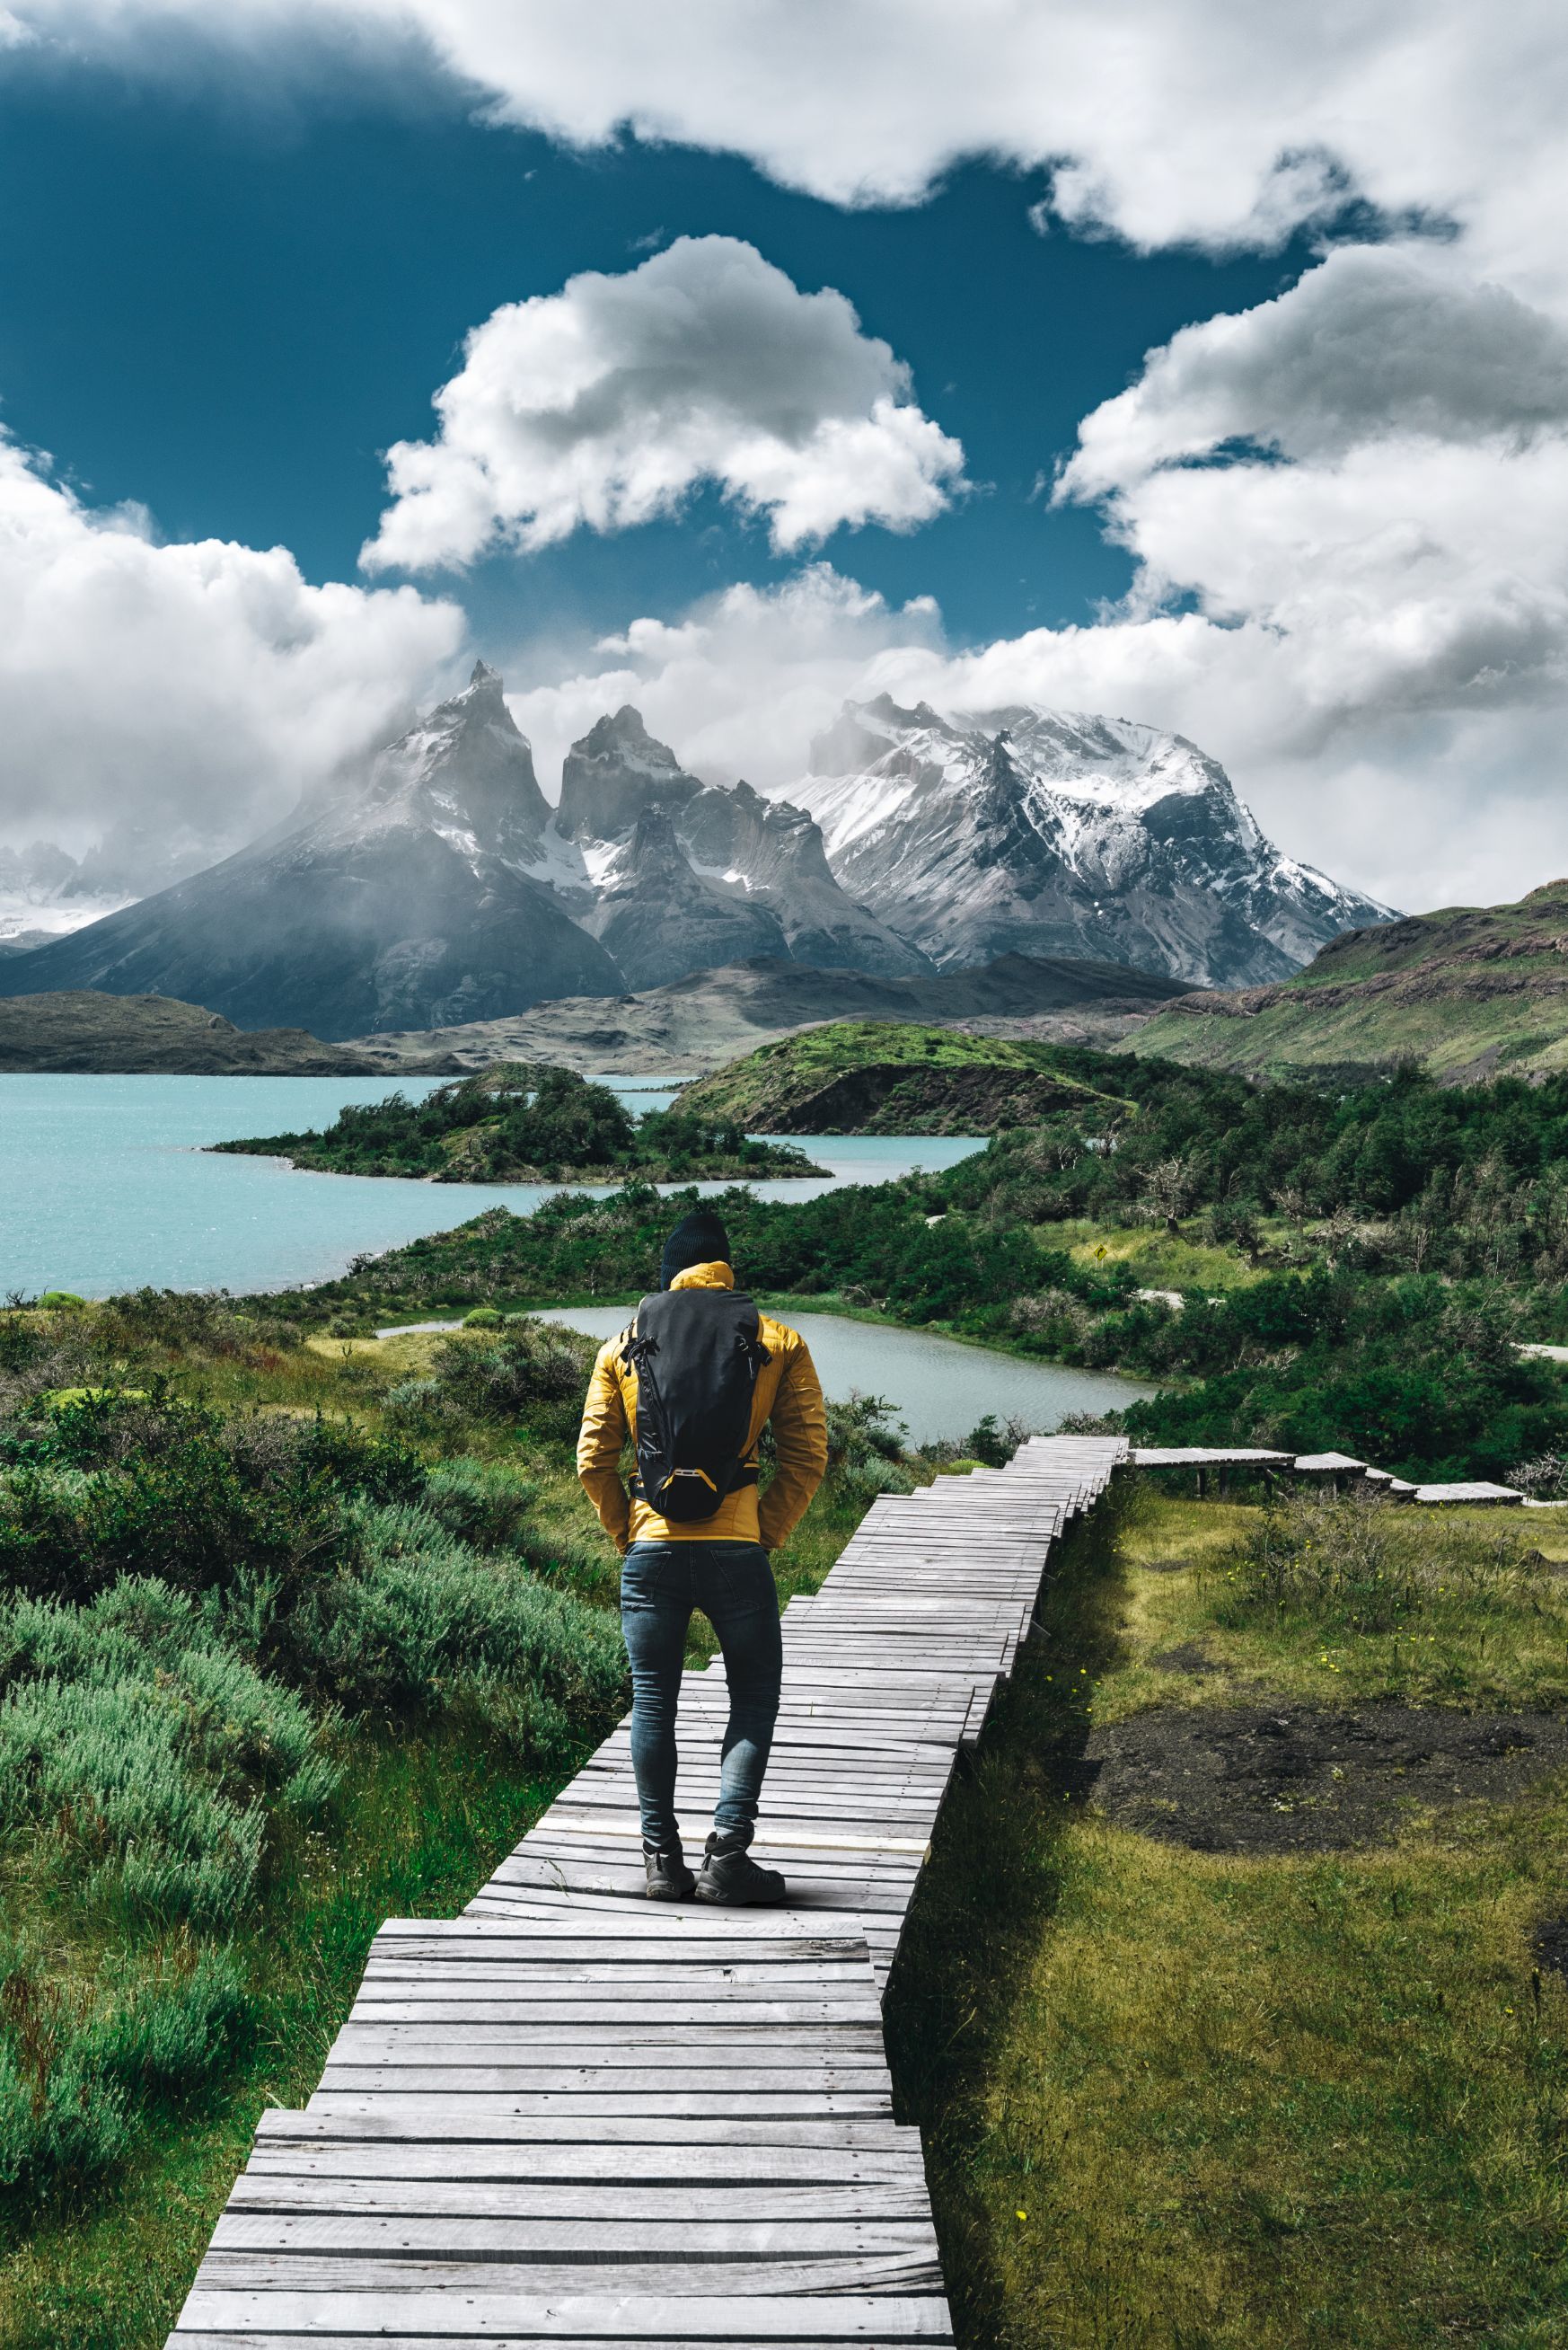 A hiker on the boardwalks of Torres del Paine, one of the most recognisable landscapes in the world. Photo: Getty